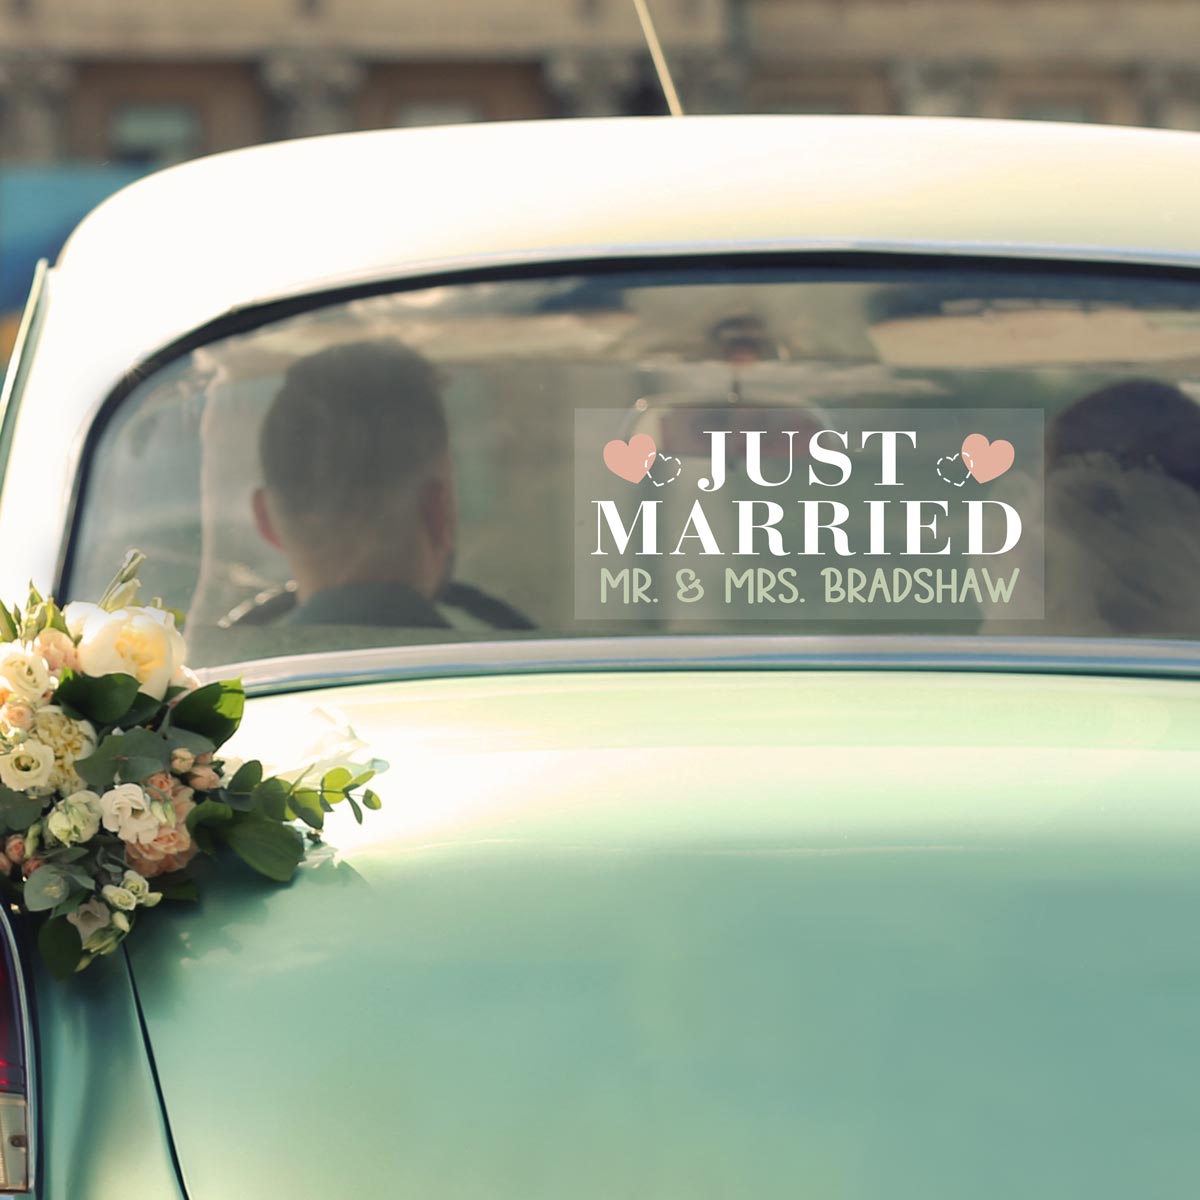 personalized just married window cling in the back window of a classic car